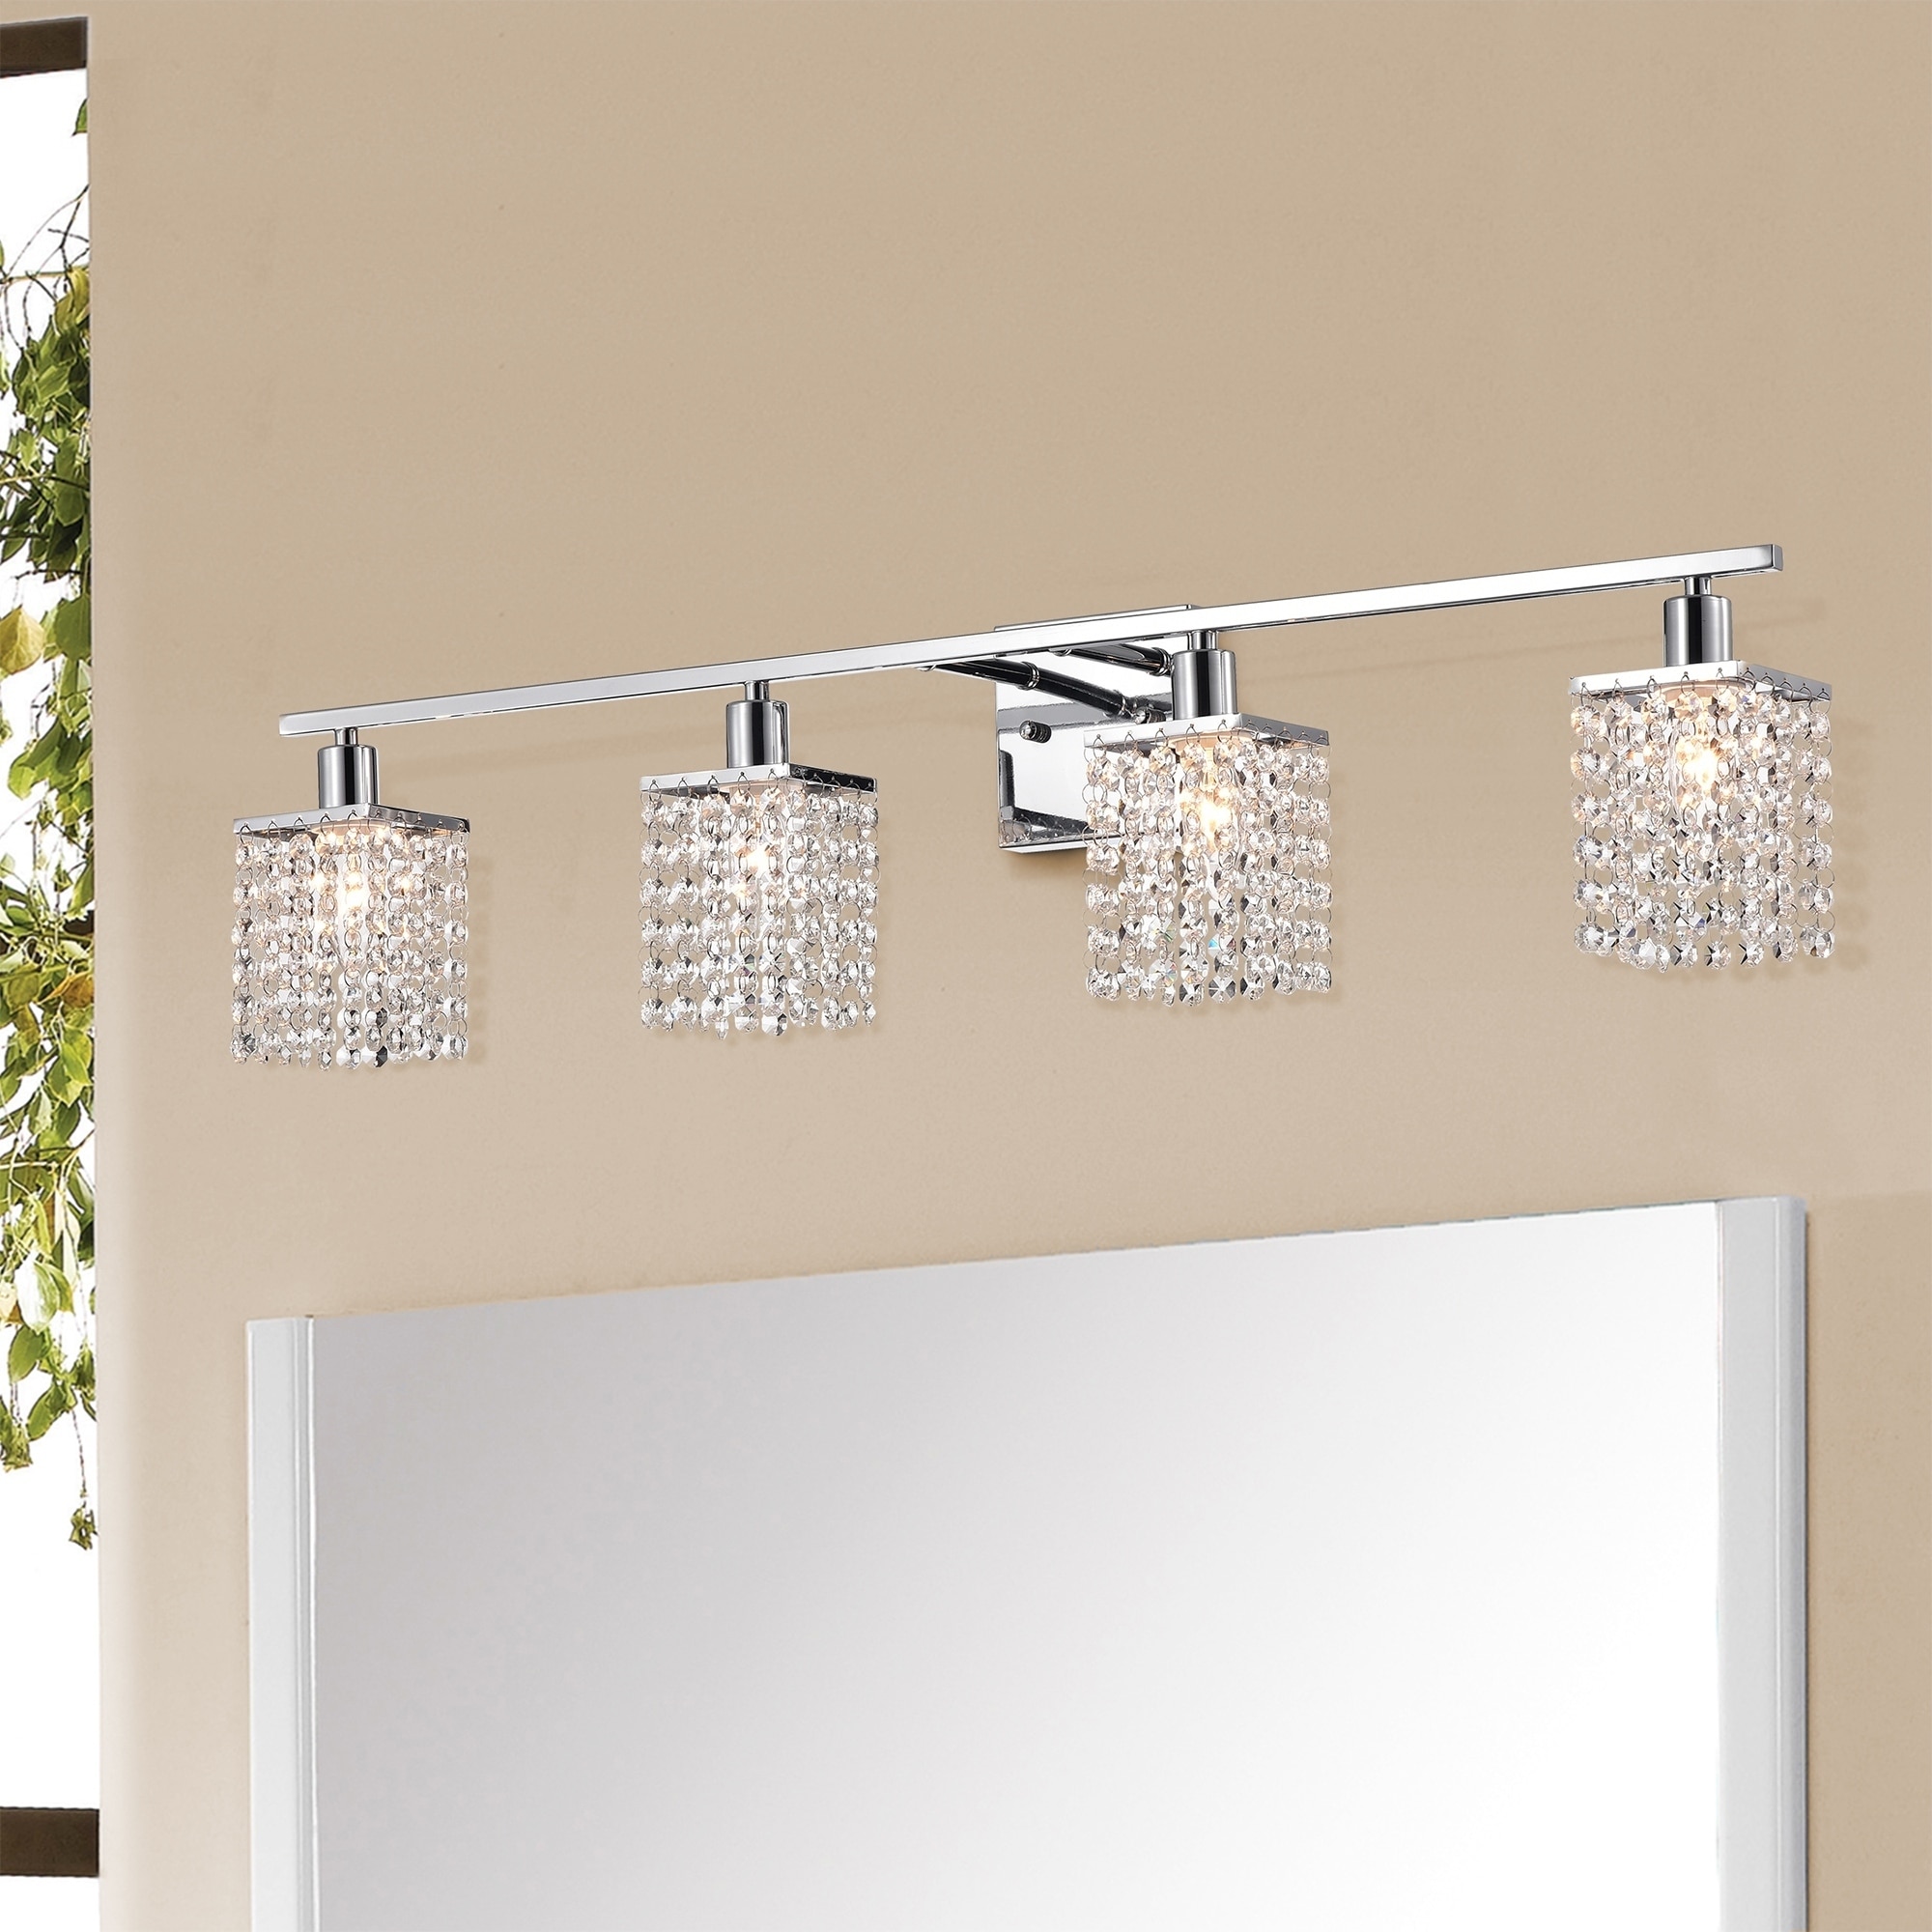 Frindin Chrome 4 Light Wall Sconce Vanity Lighting With Crystal Shades Overstock 27636206